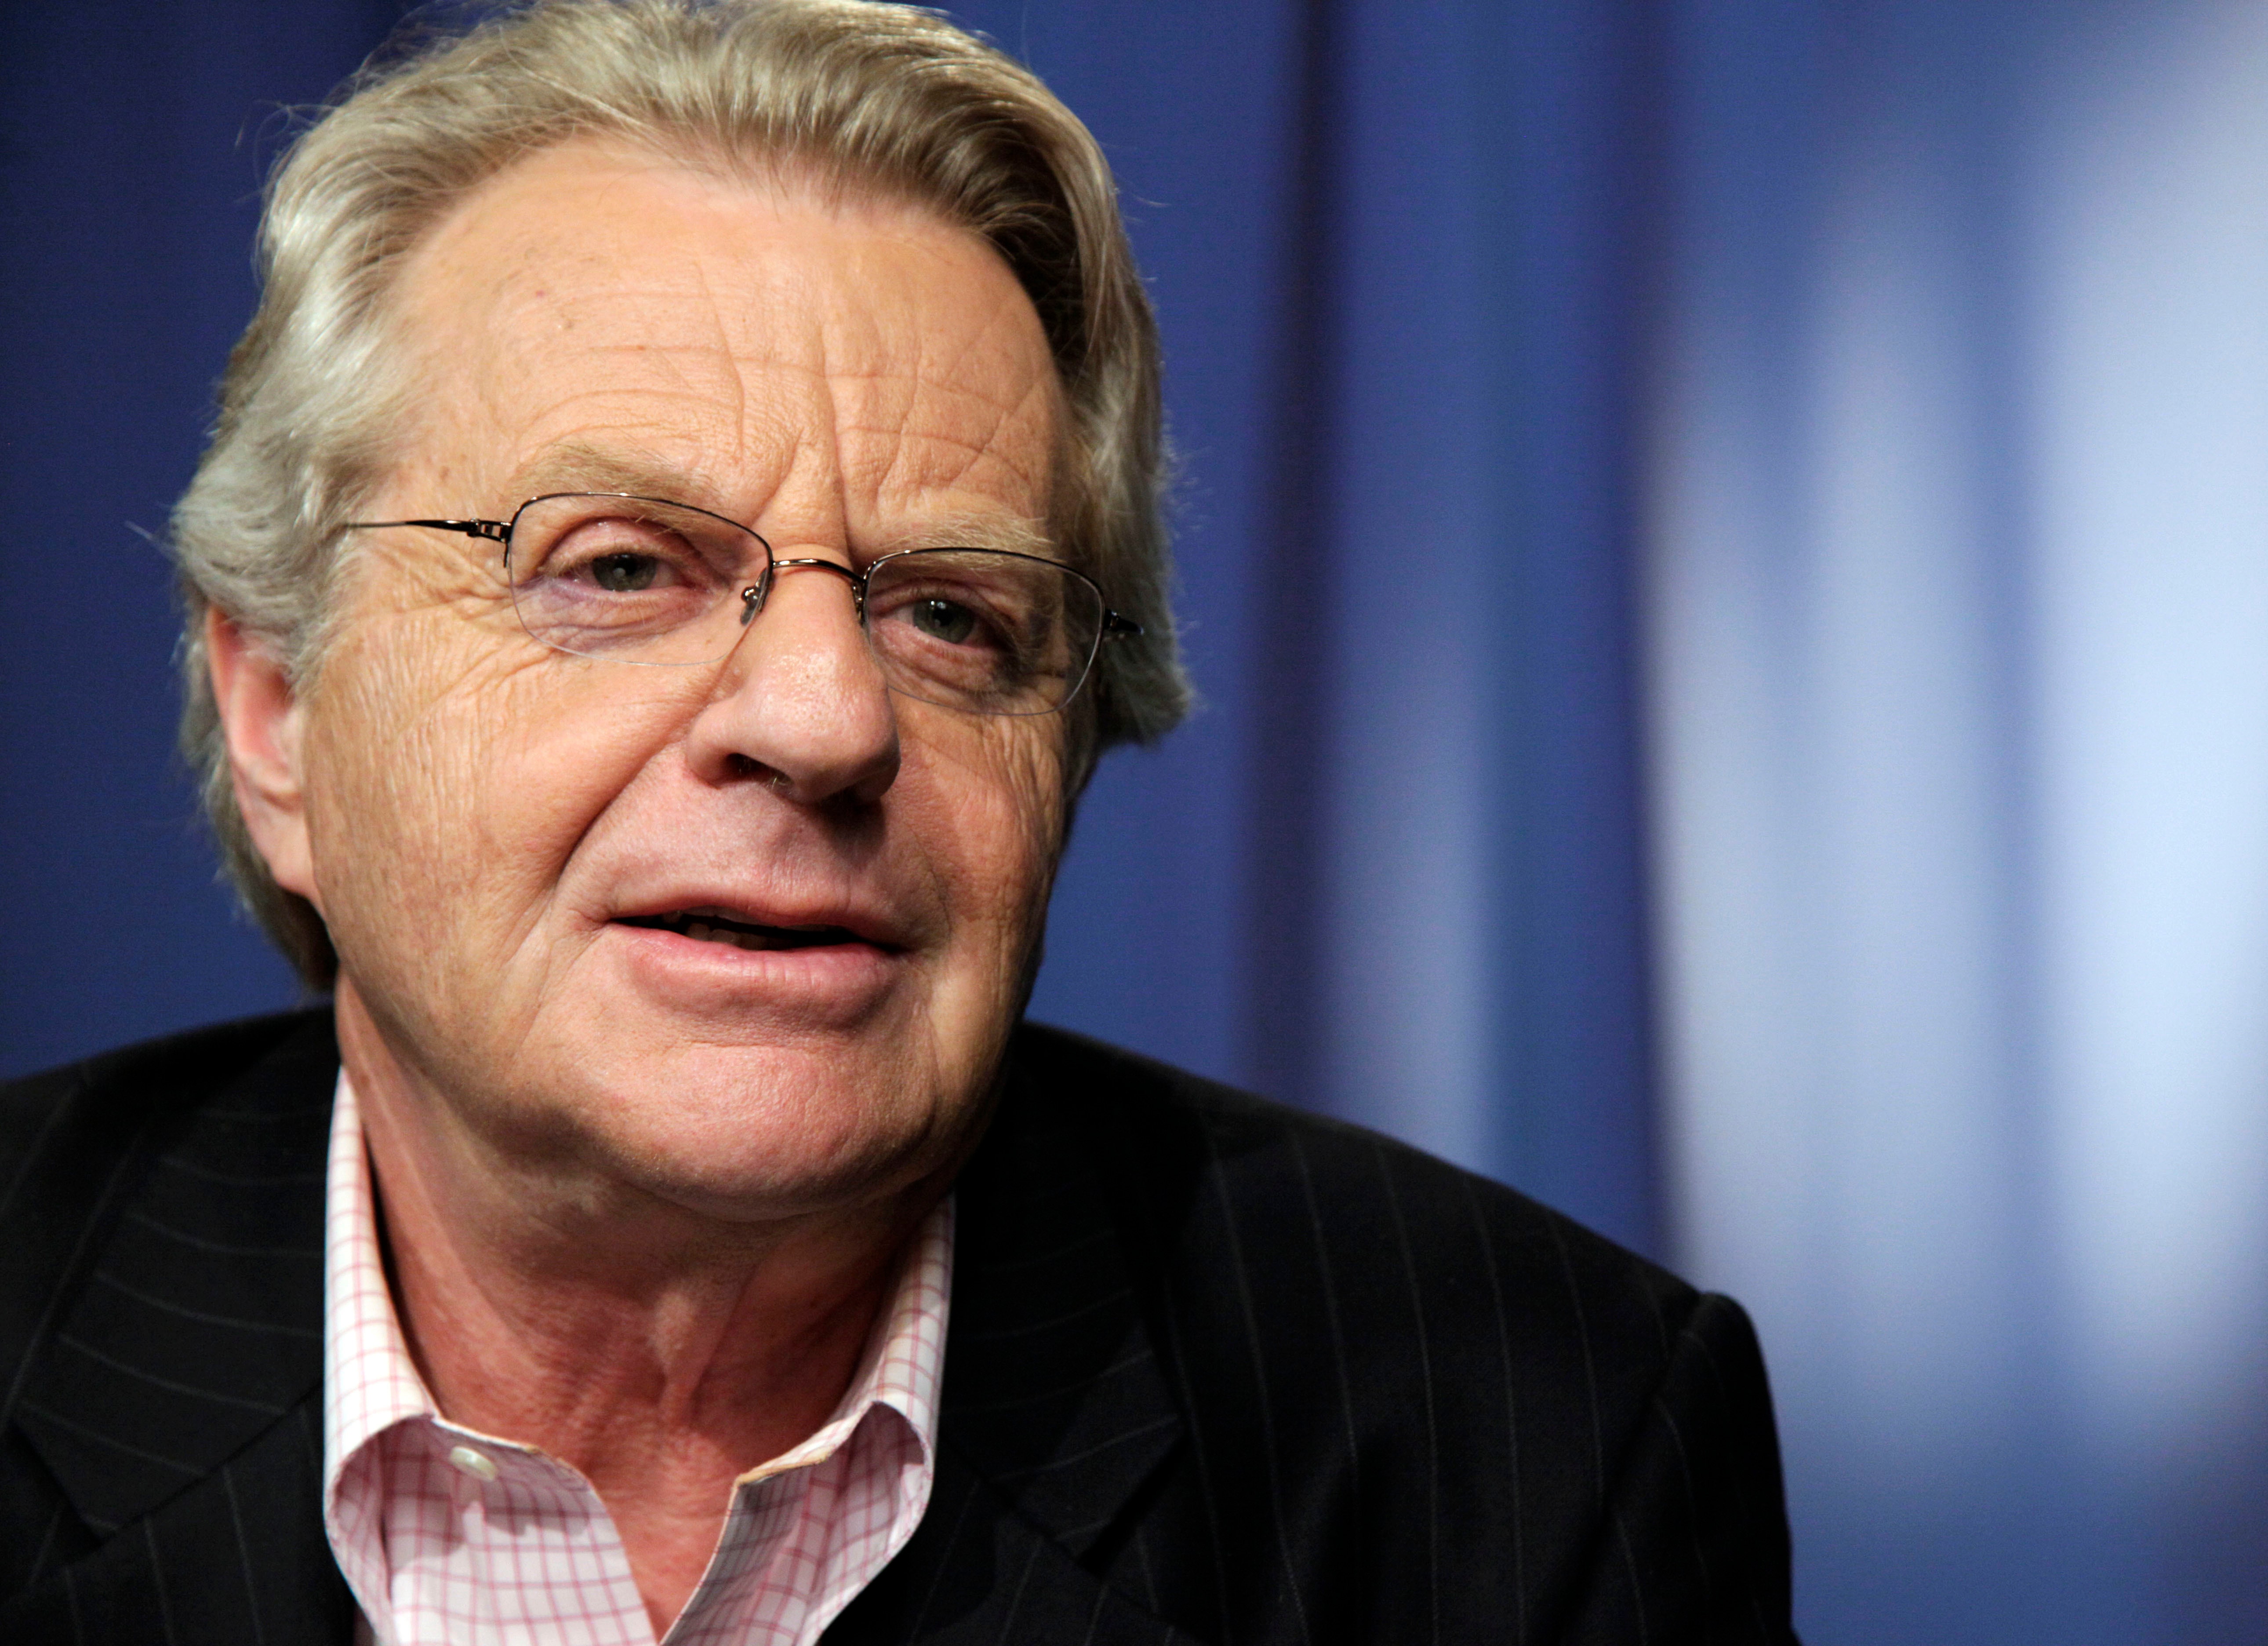 Jerry Springer lands his own court show.